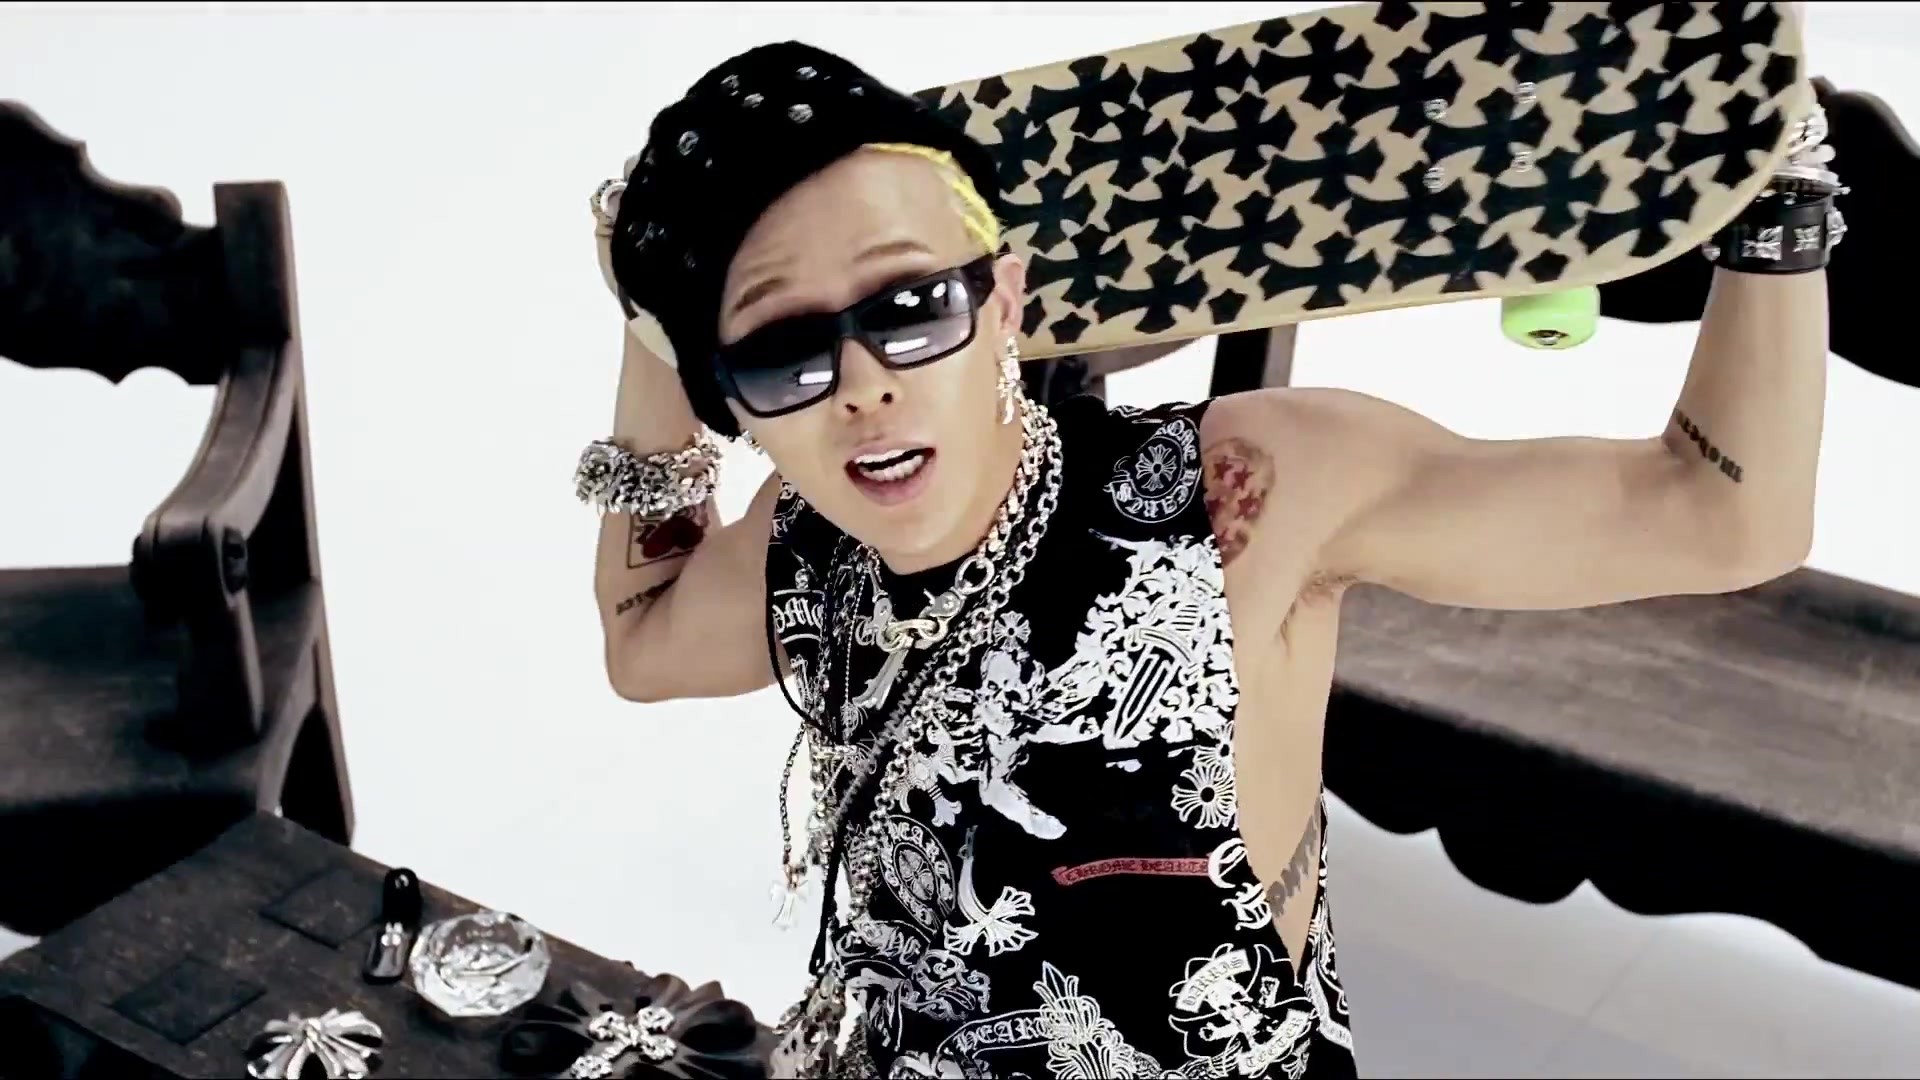 1920x1080 Dragon Wallpaper One Of A Kind gdragon wallpaper related keywords